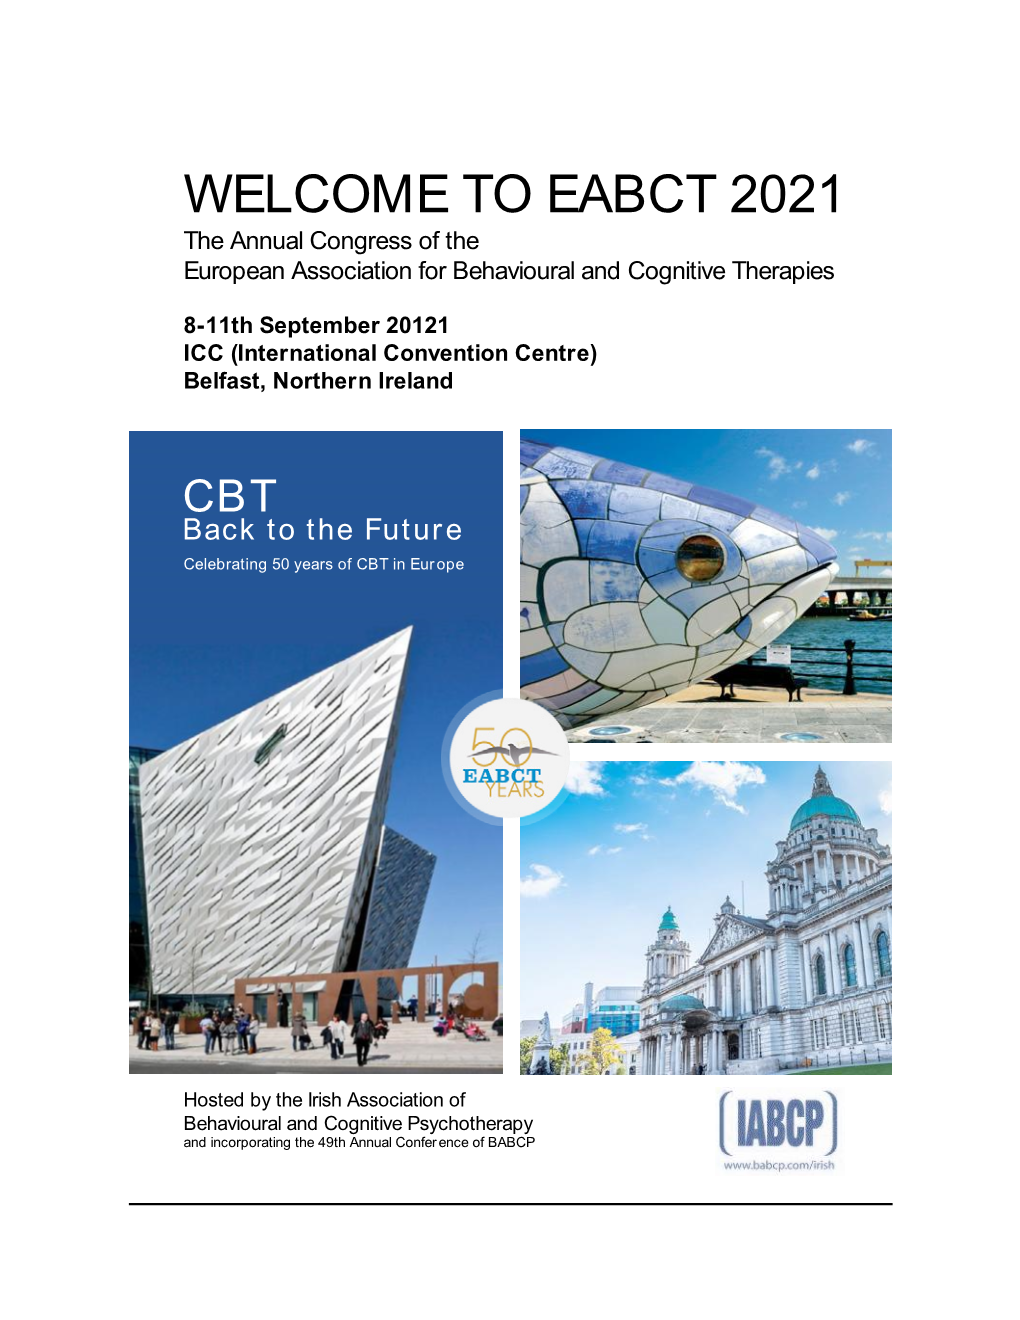 WELCOME to EABCT 2021 the Annual Congress of the European Association for Behavioural and Cognitive Therapies